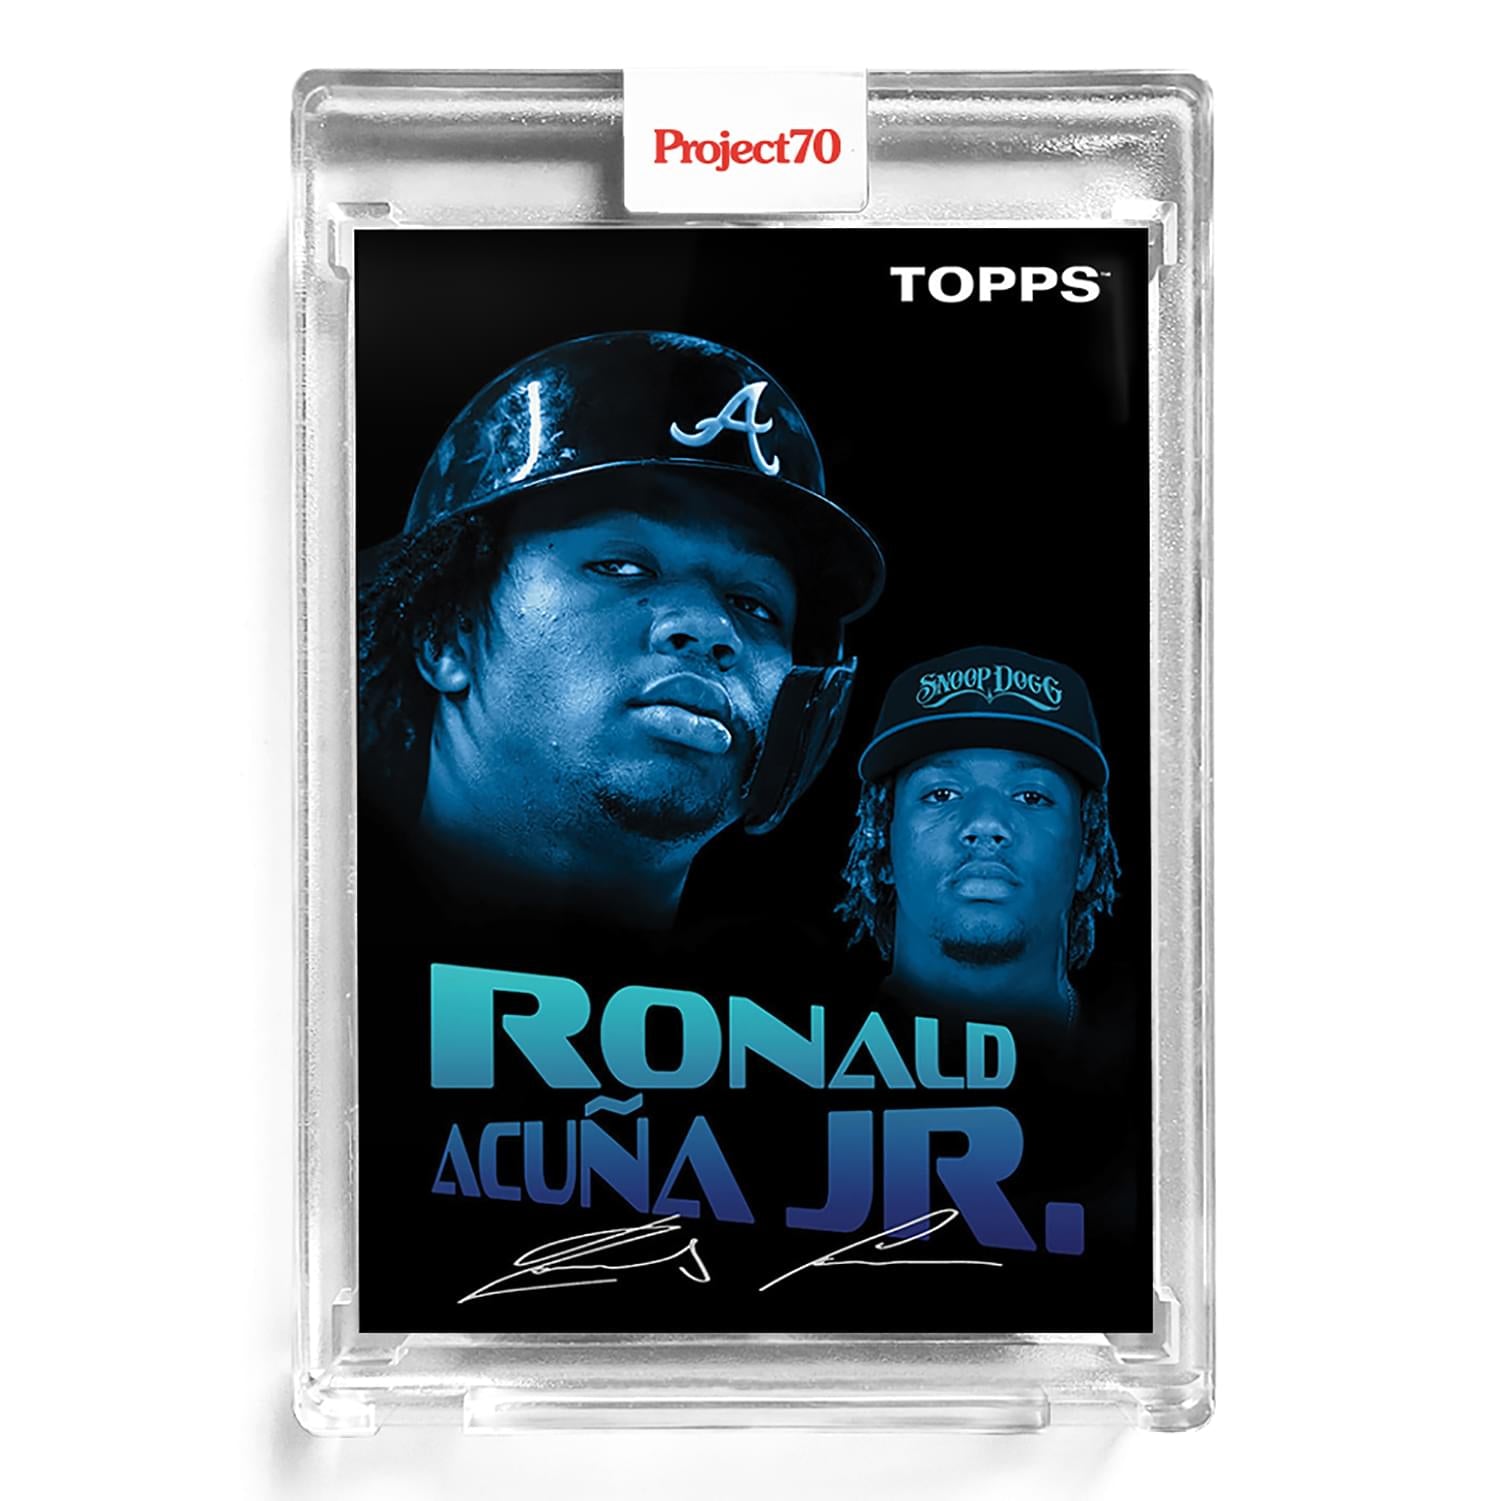 Topps Project70 Card 4 - 1954 Ronald Acuna Jr. By Snoop Dogg